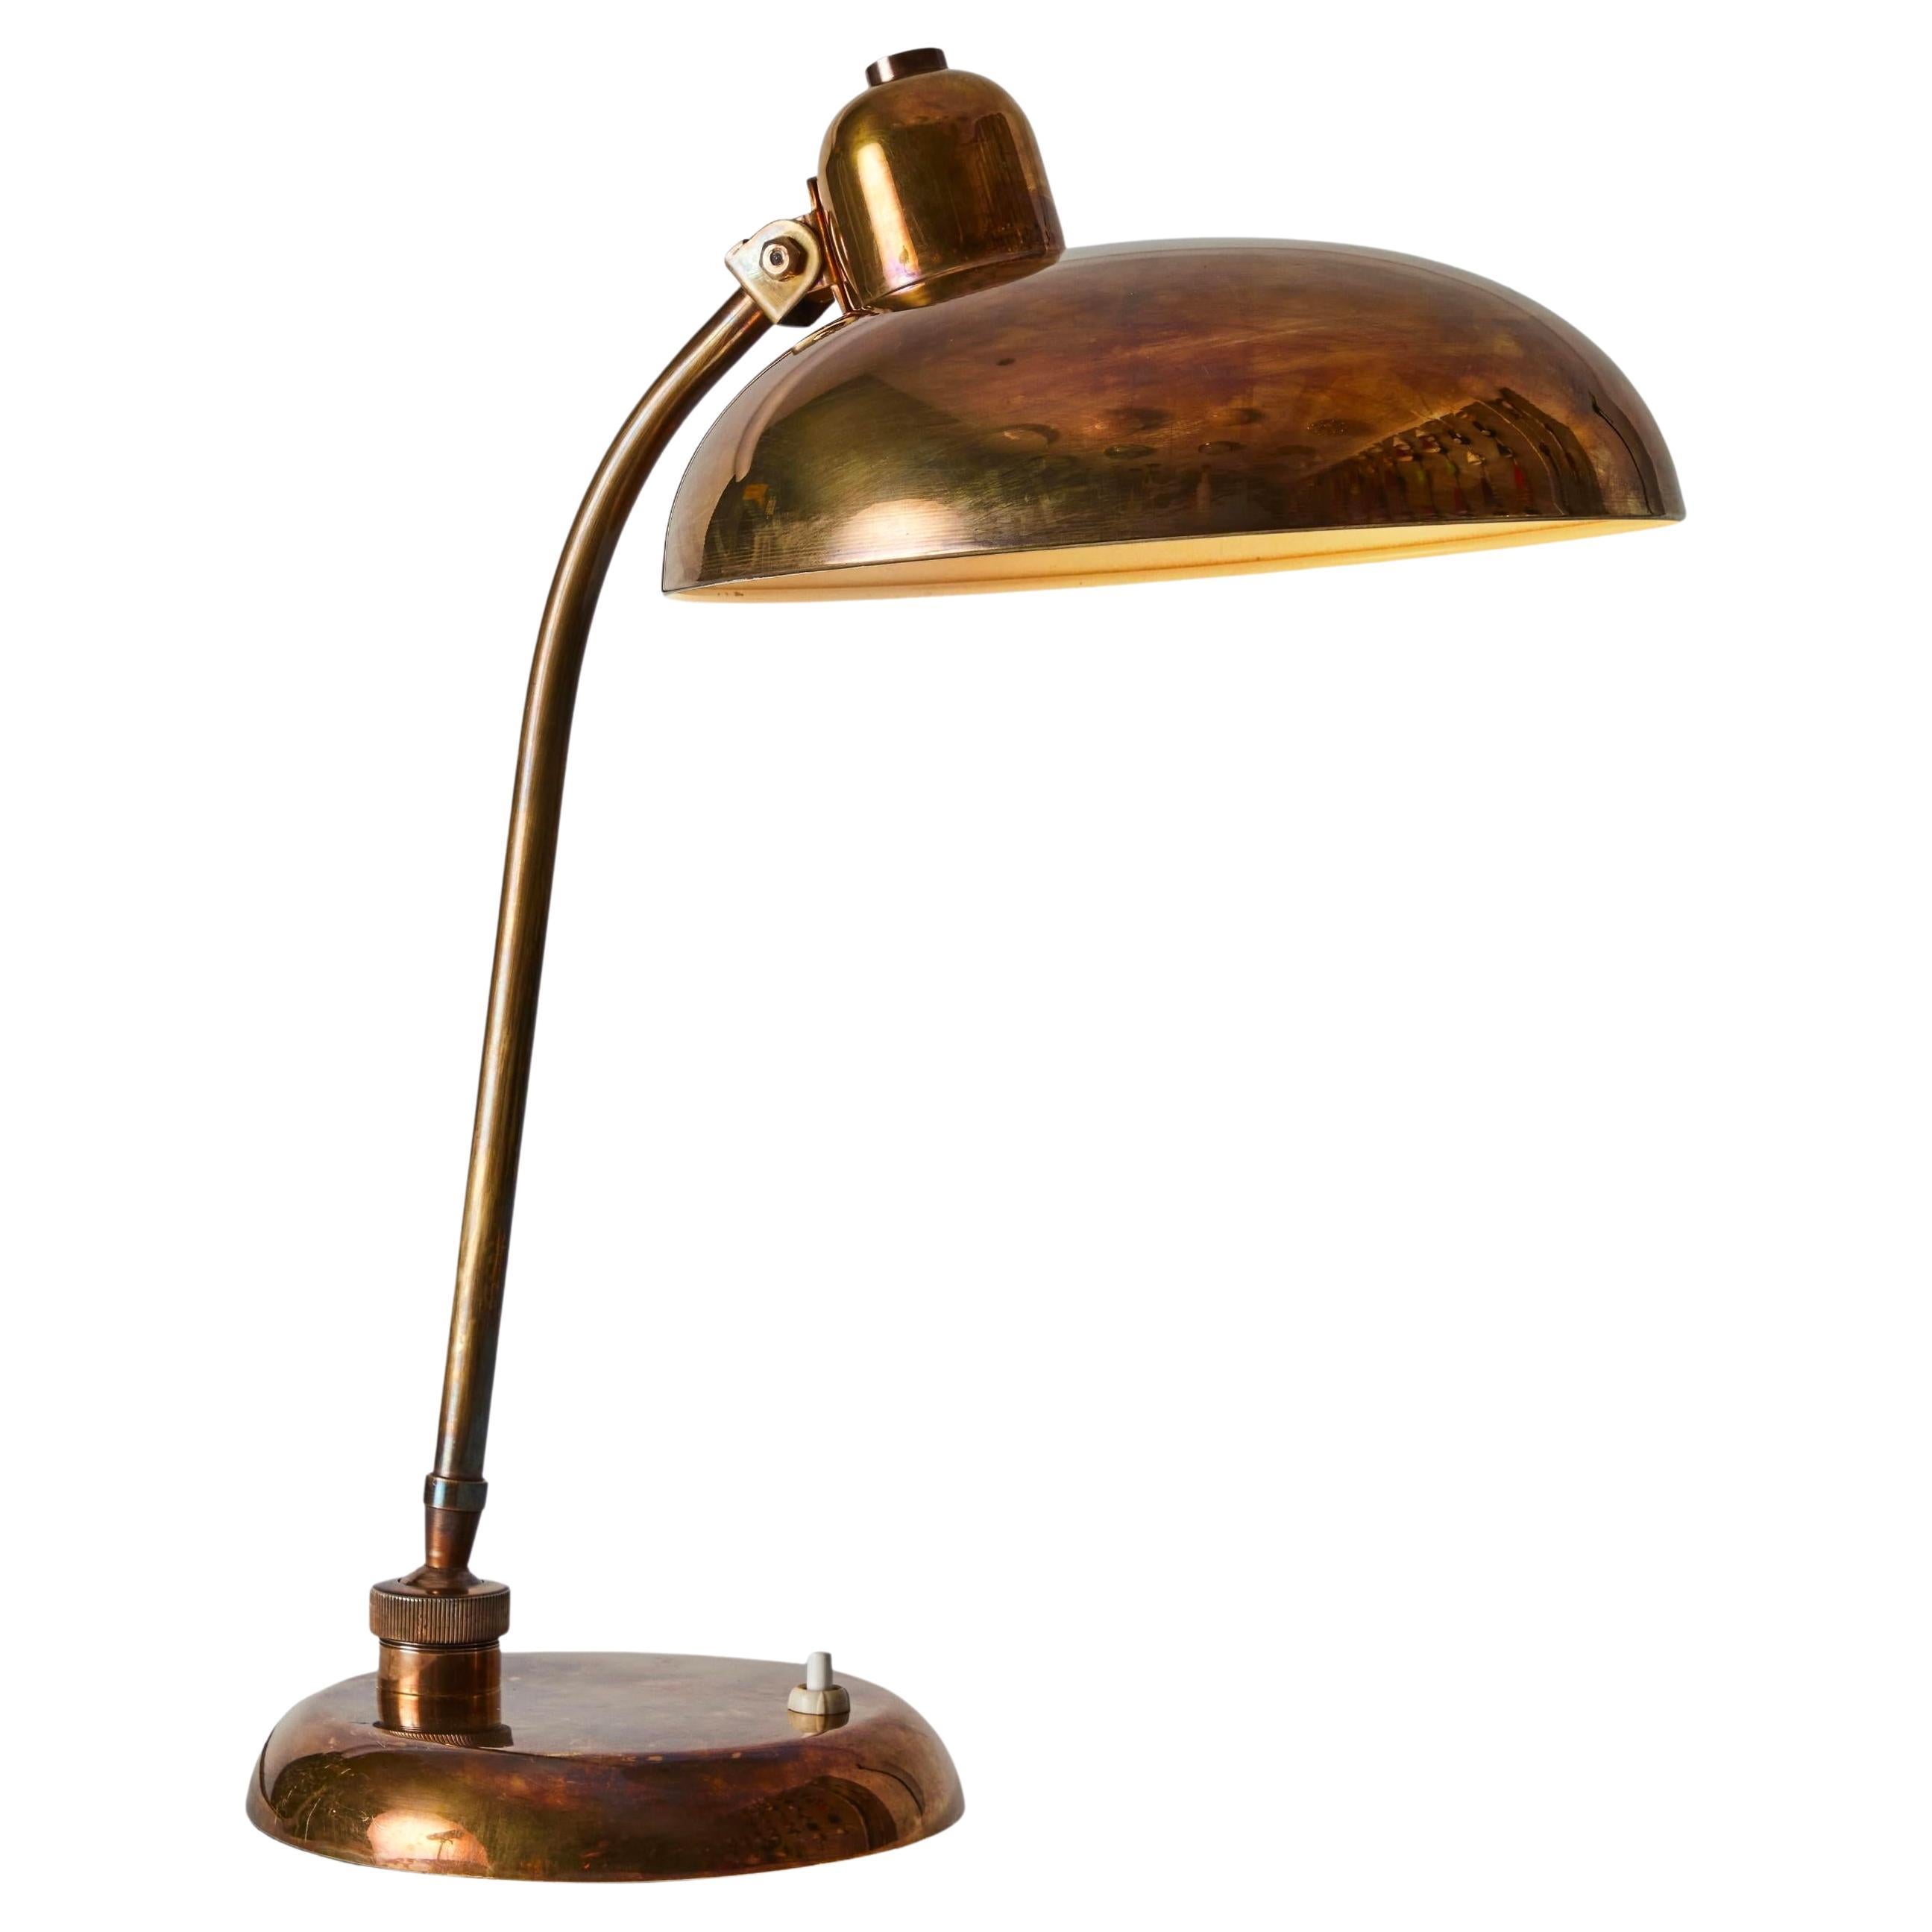 1940s Giovanni Michelucci Patinated Brass Ministerial Table Lamp for Lariolux